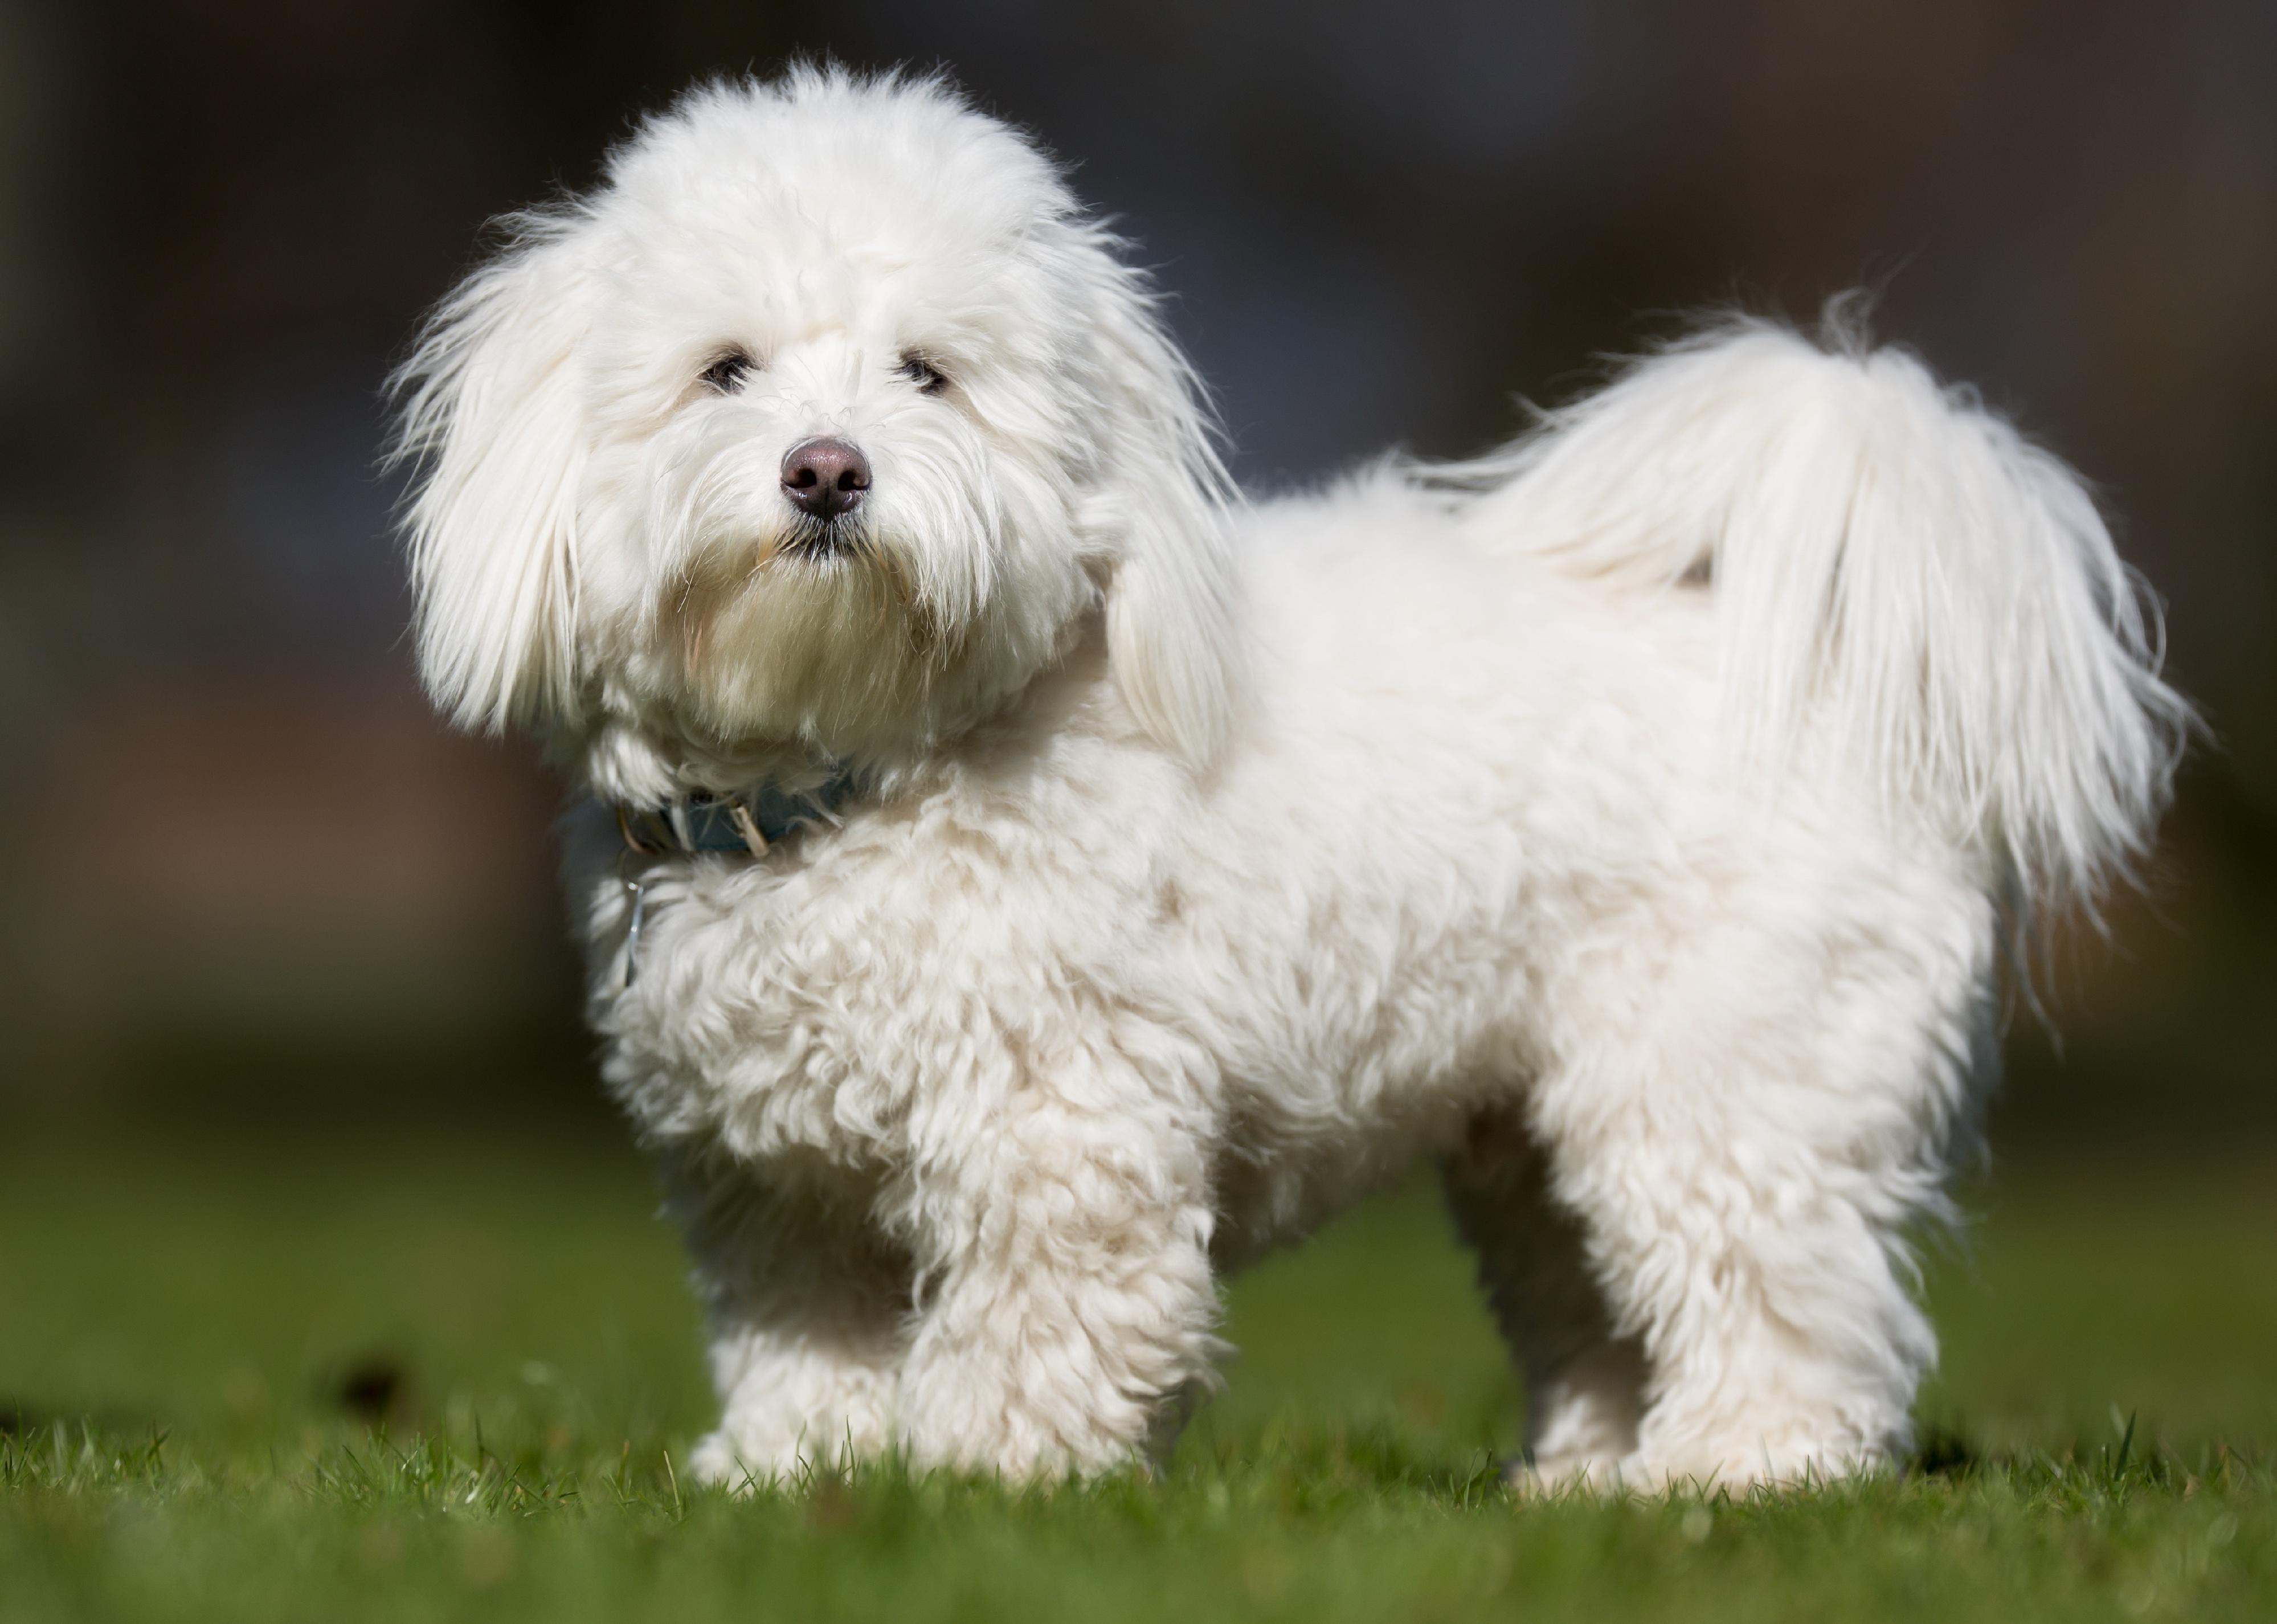 A Coton de Tulear dog without leash outdoors on a sunny day.